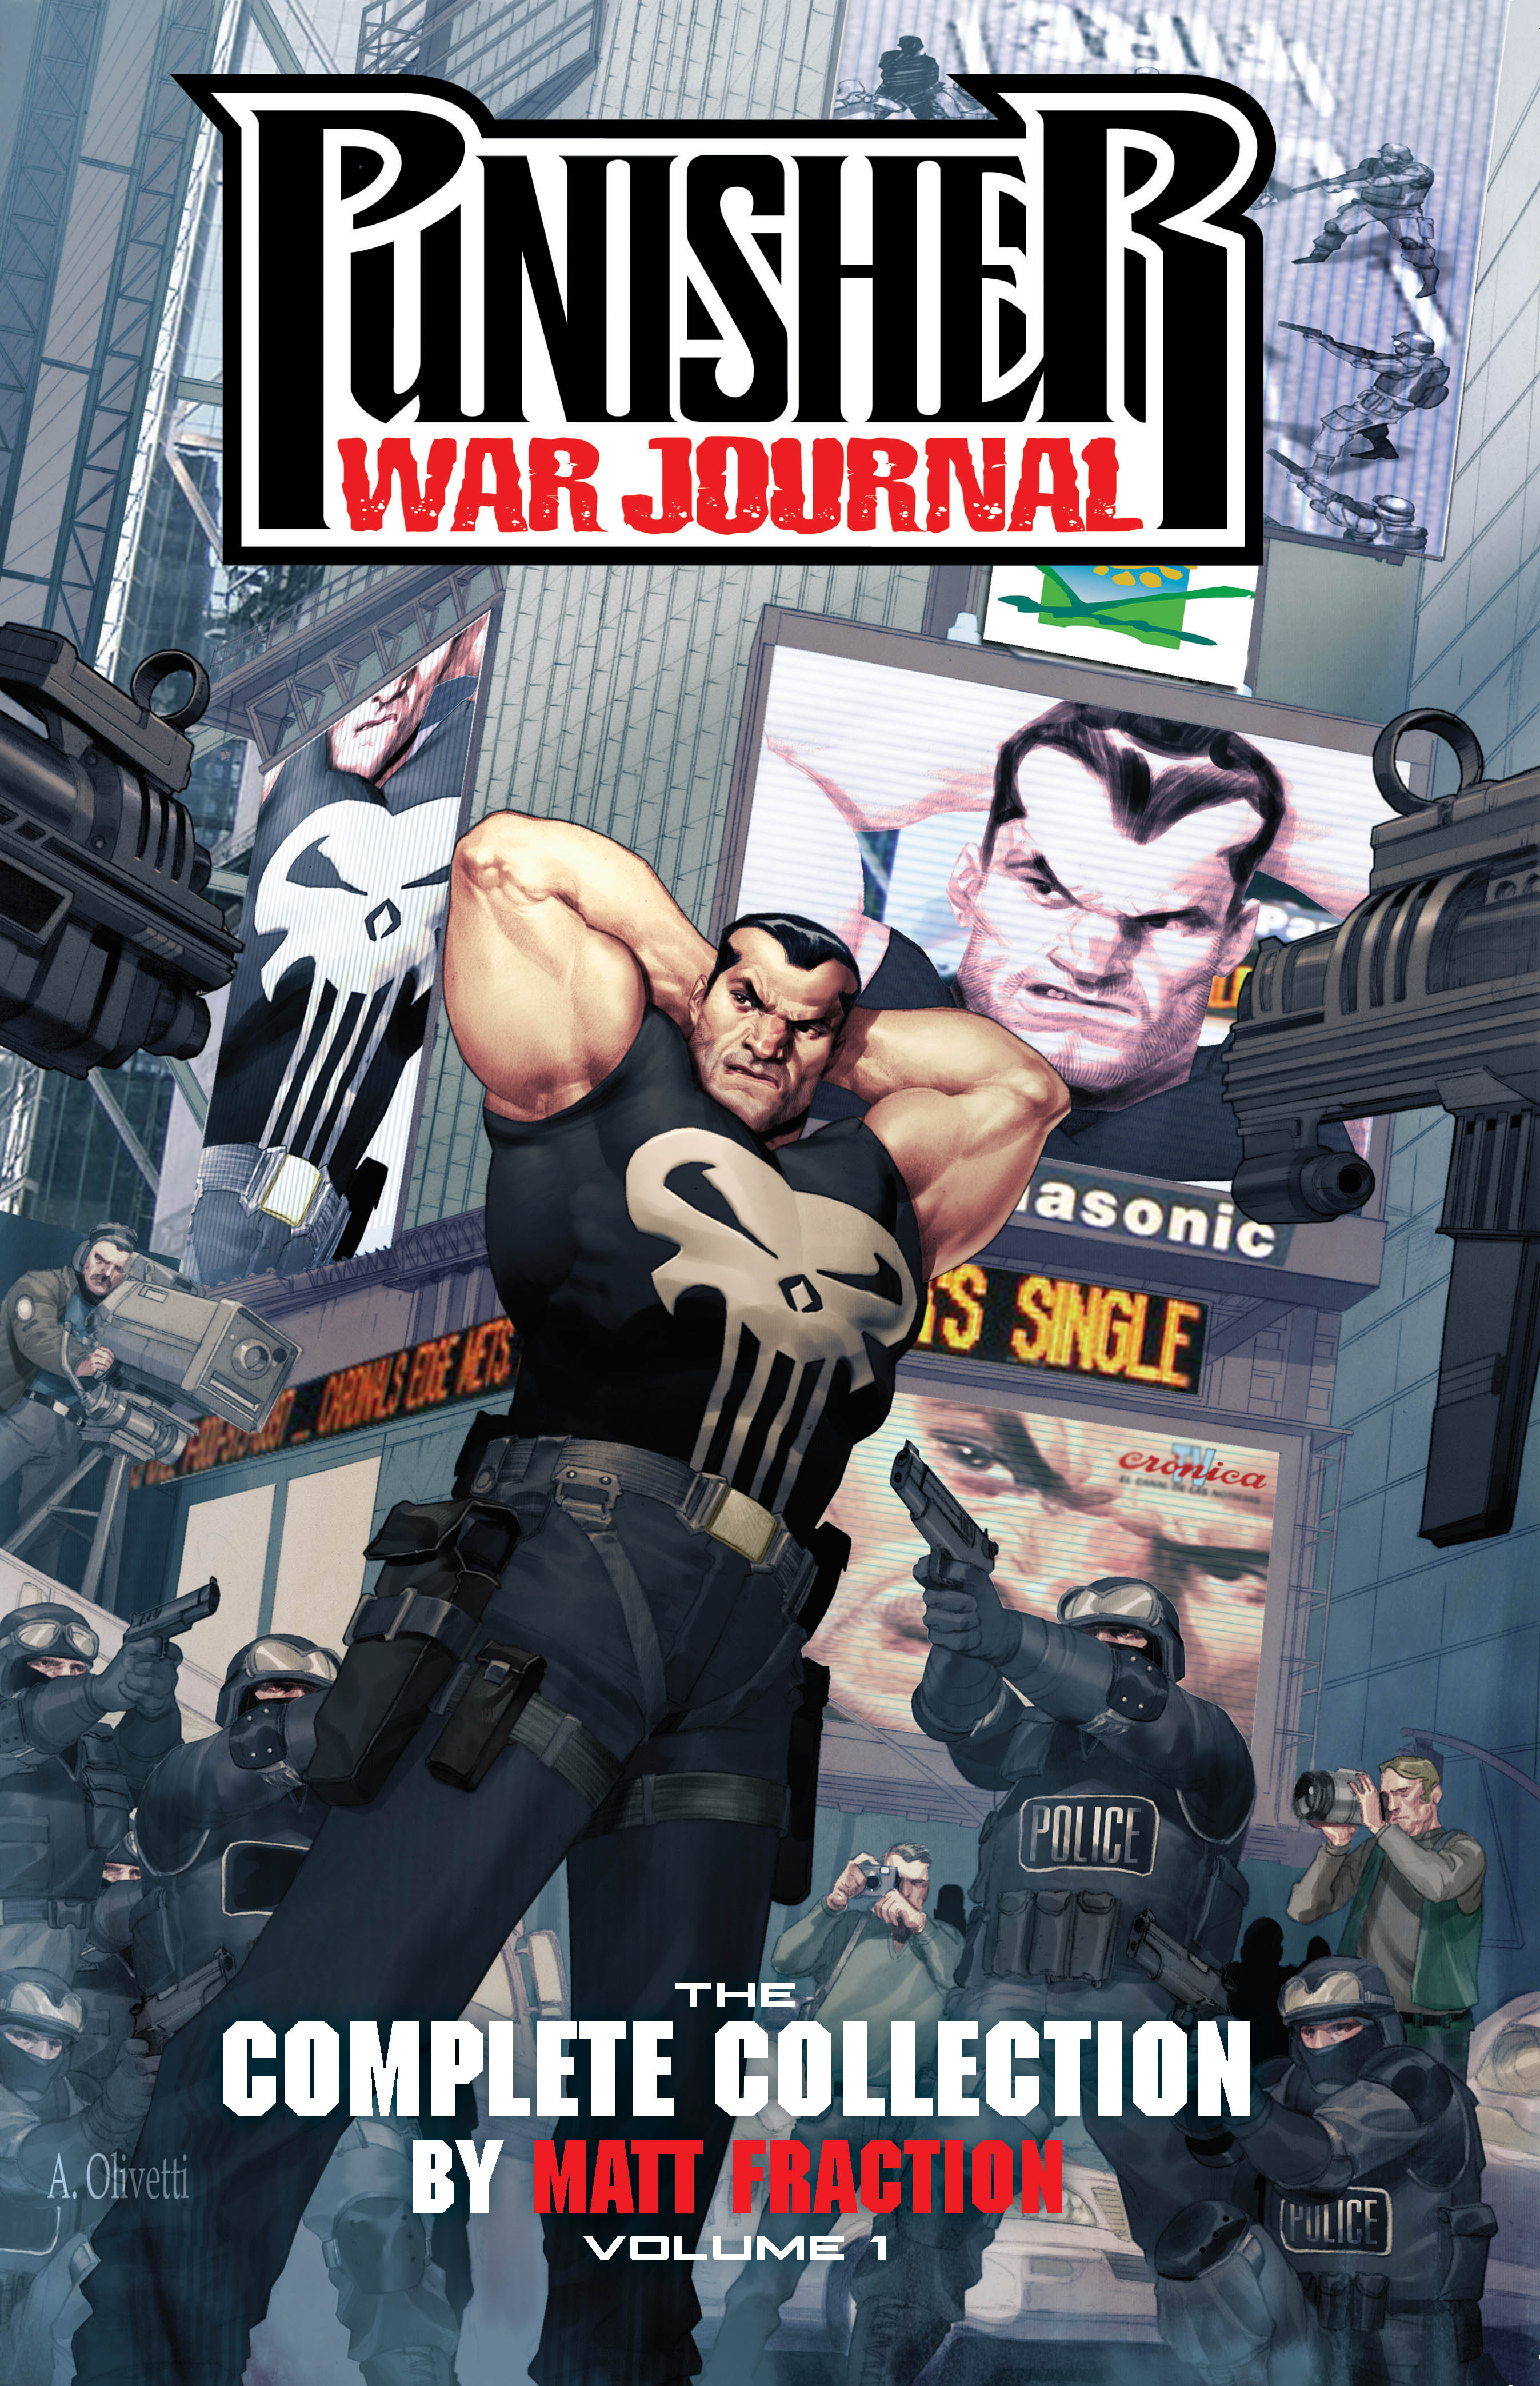 Punisher War Journal by Matt Fraction: The Complete Collection Vol. 1 (Trade Paperback)